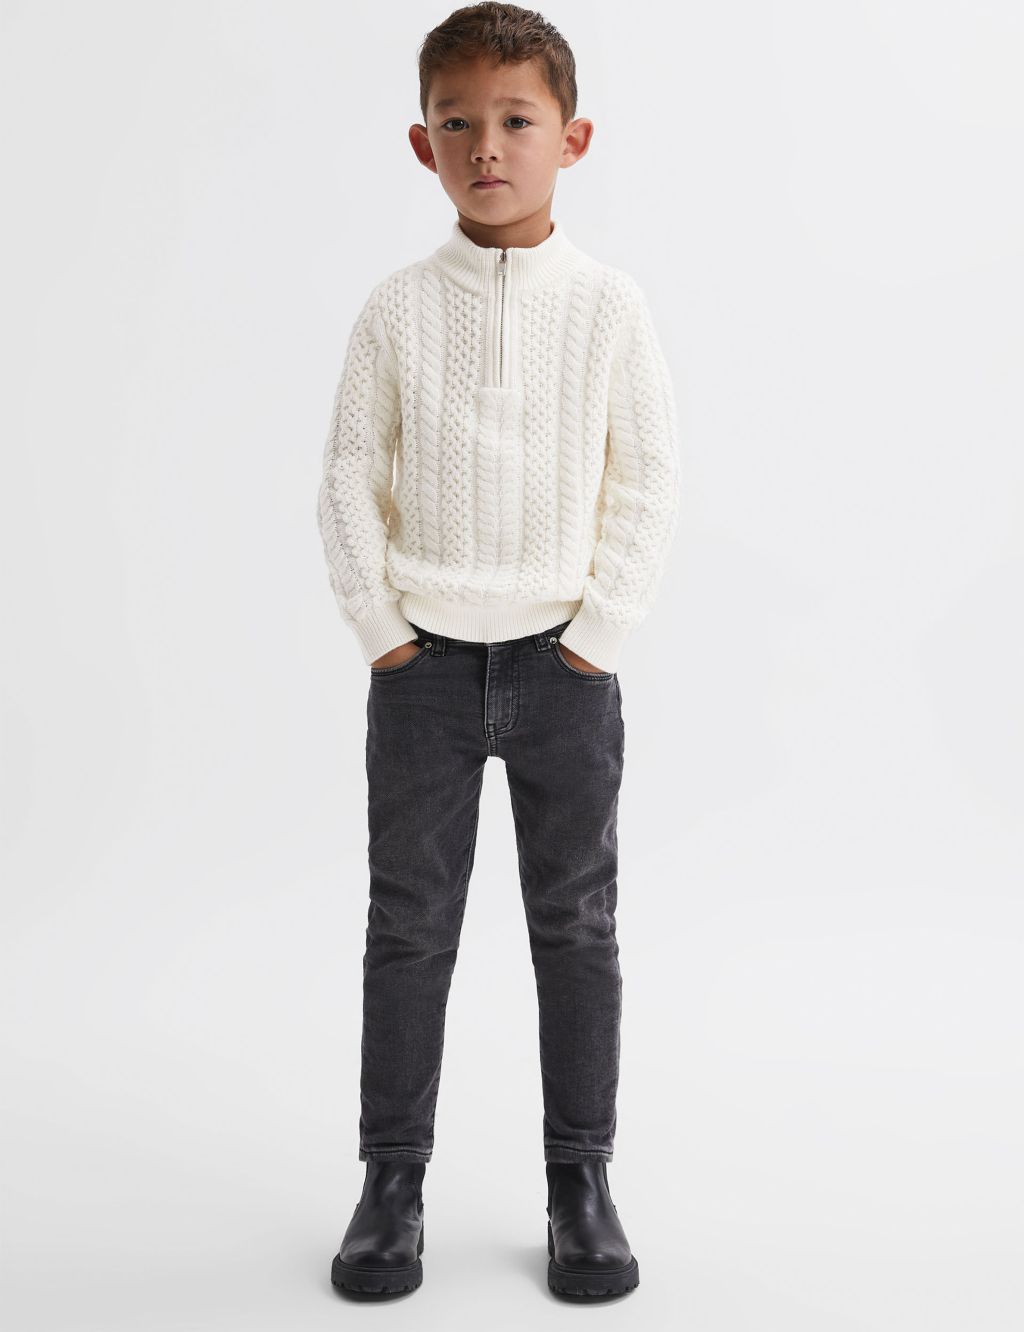 Cable Knit Half Zip Jumper with Wool (3-14 Yrs) image 3